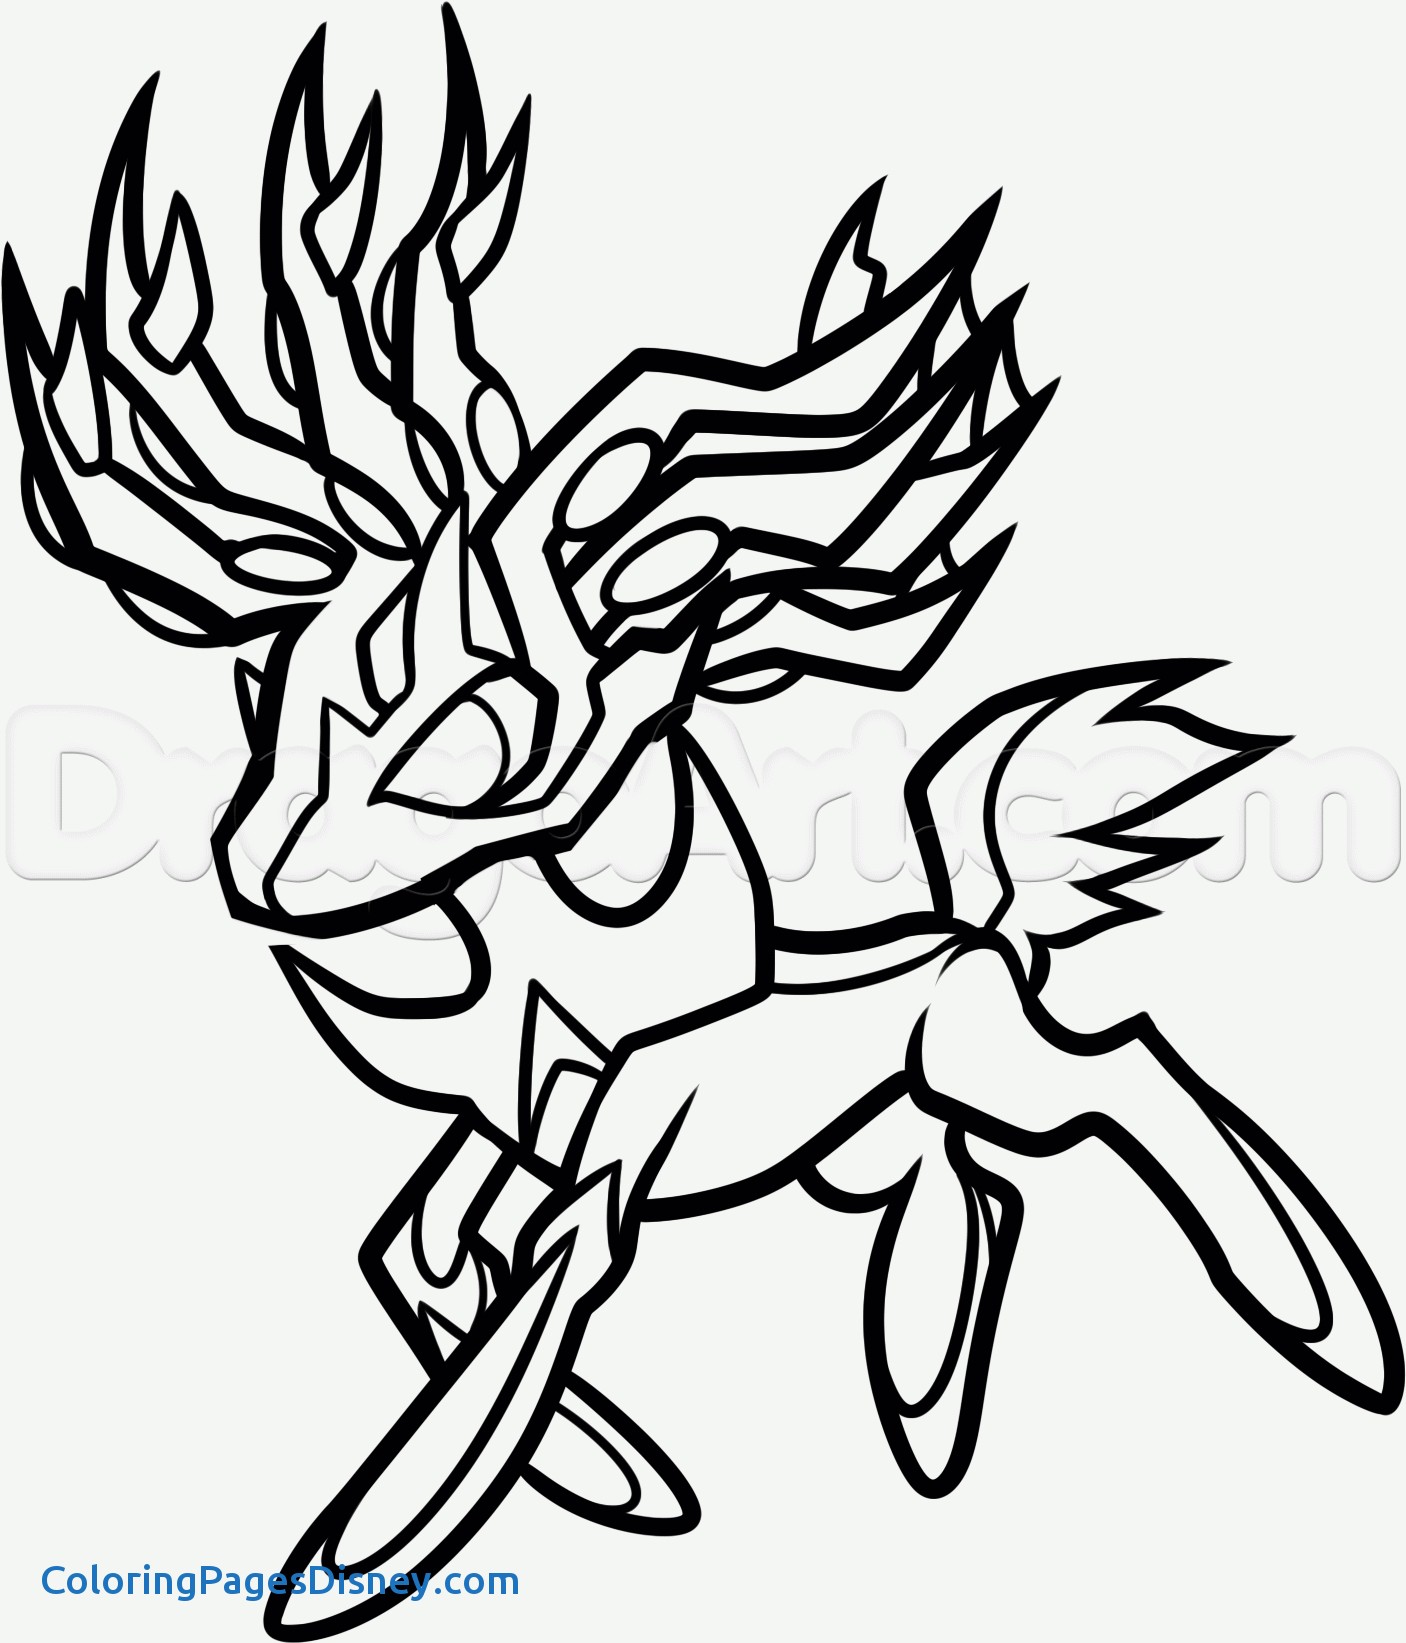 Xerneas Coloring Pages at GetColorings.com   Free printable colorings ...